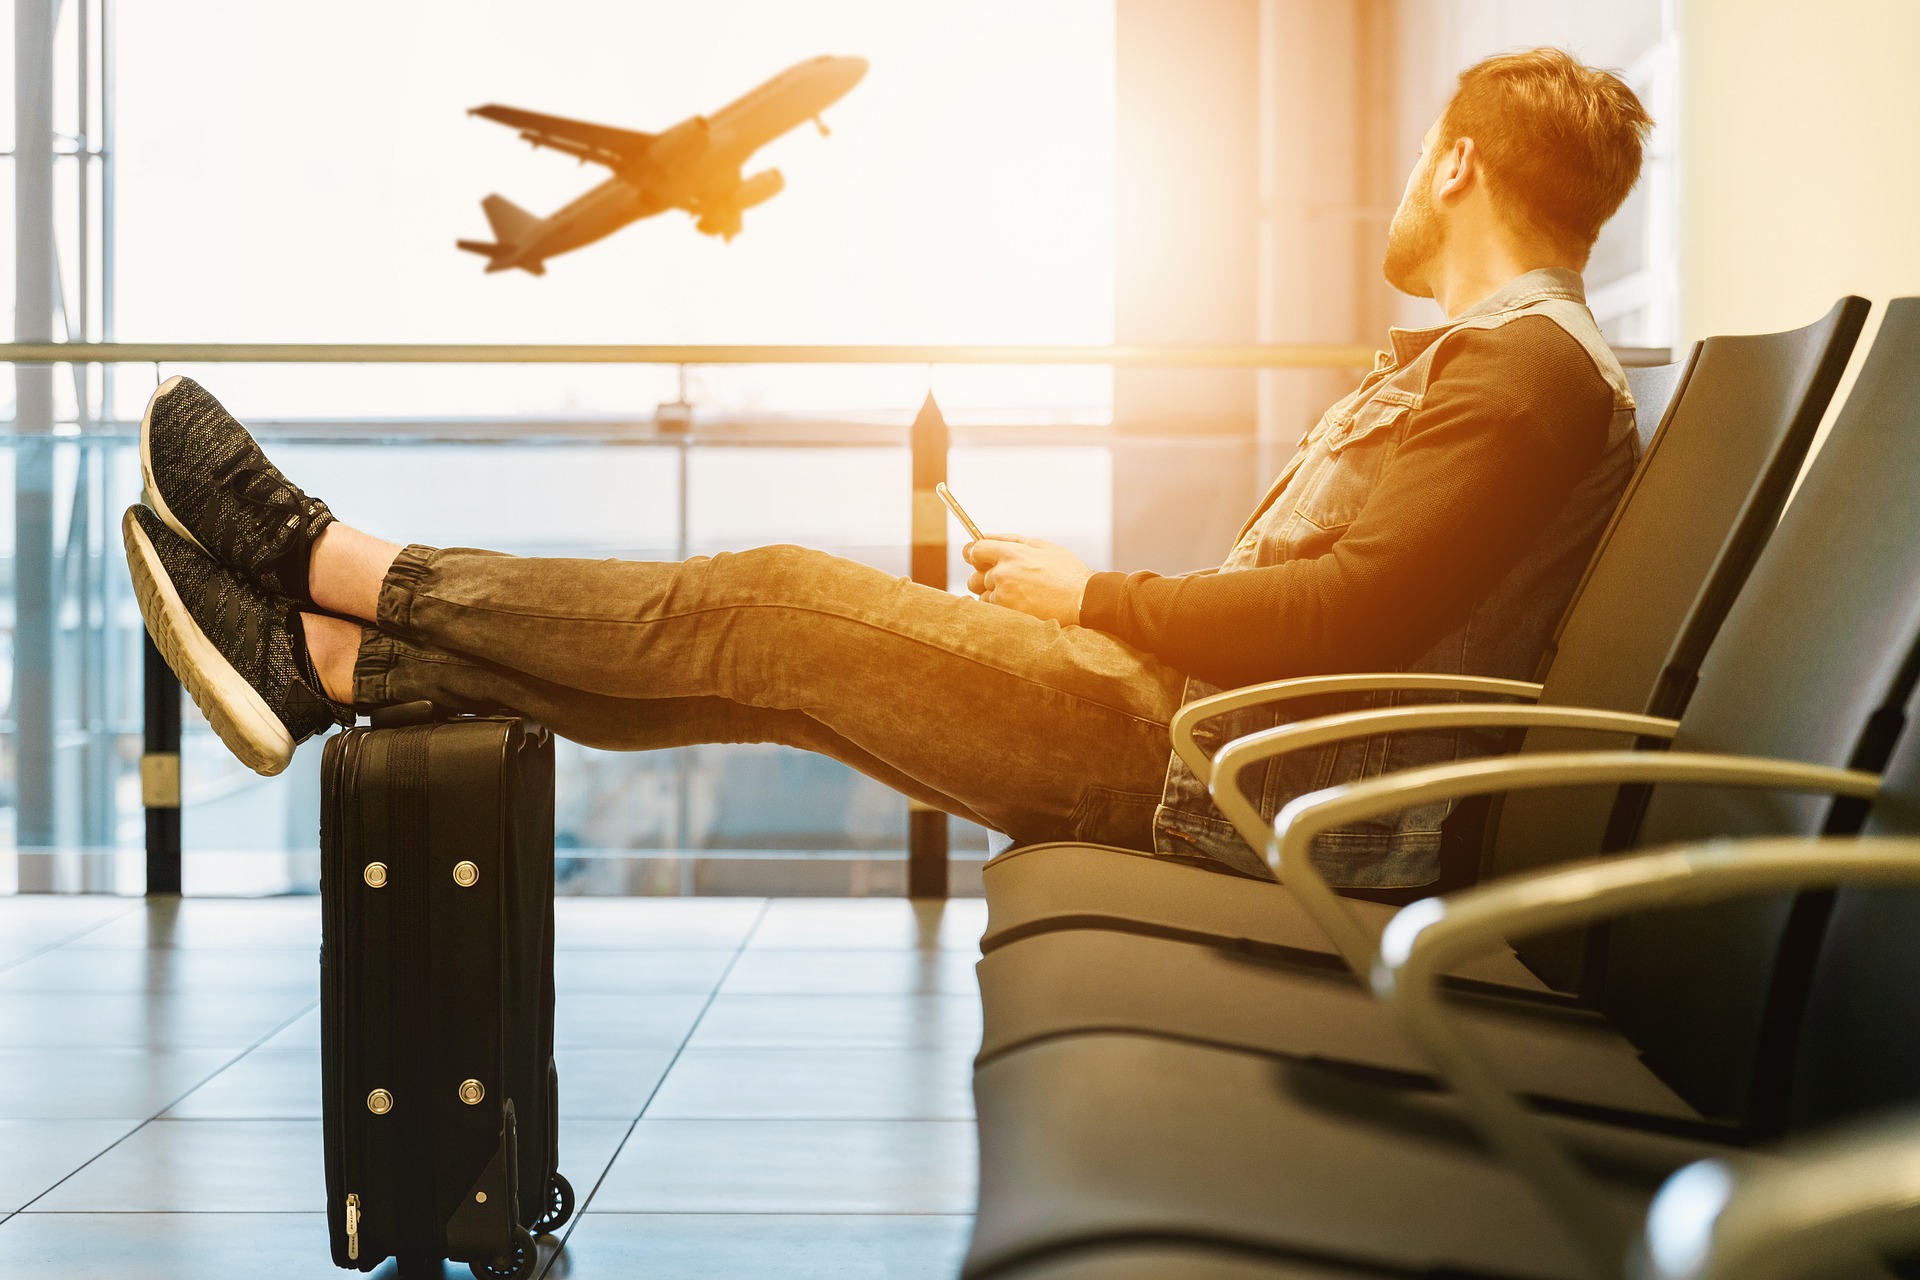 Image of man with foot on top of suitcase, waiting at airport - a perk of United Silver status is that he can check a bag for free, providing extra value on each flight